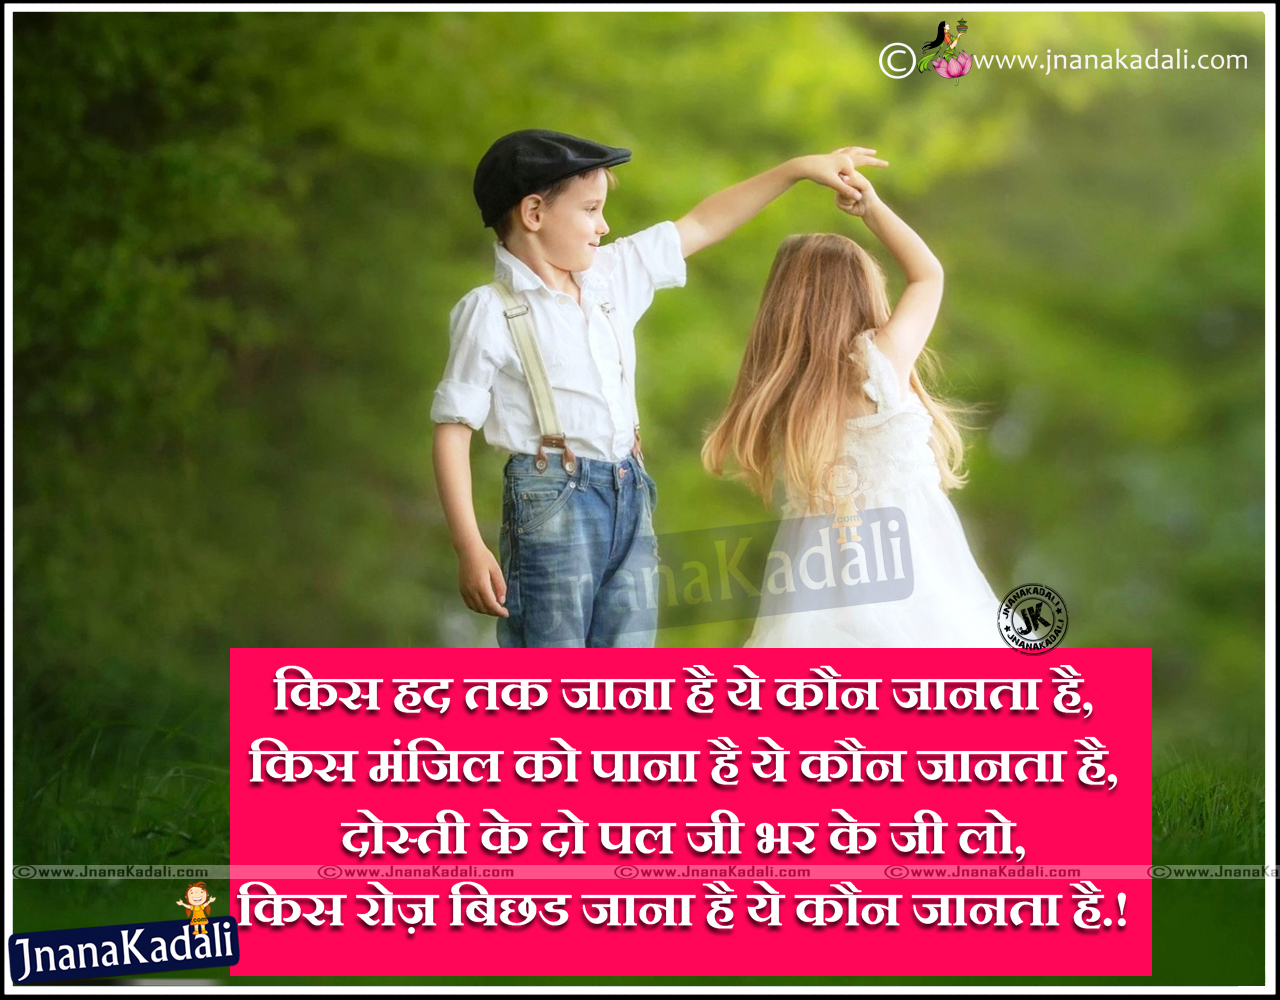 Best Hindi Loyal Friendship Quotes &Nice Sayings Pictures ...